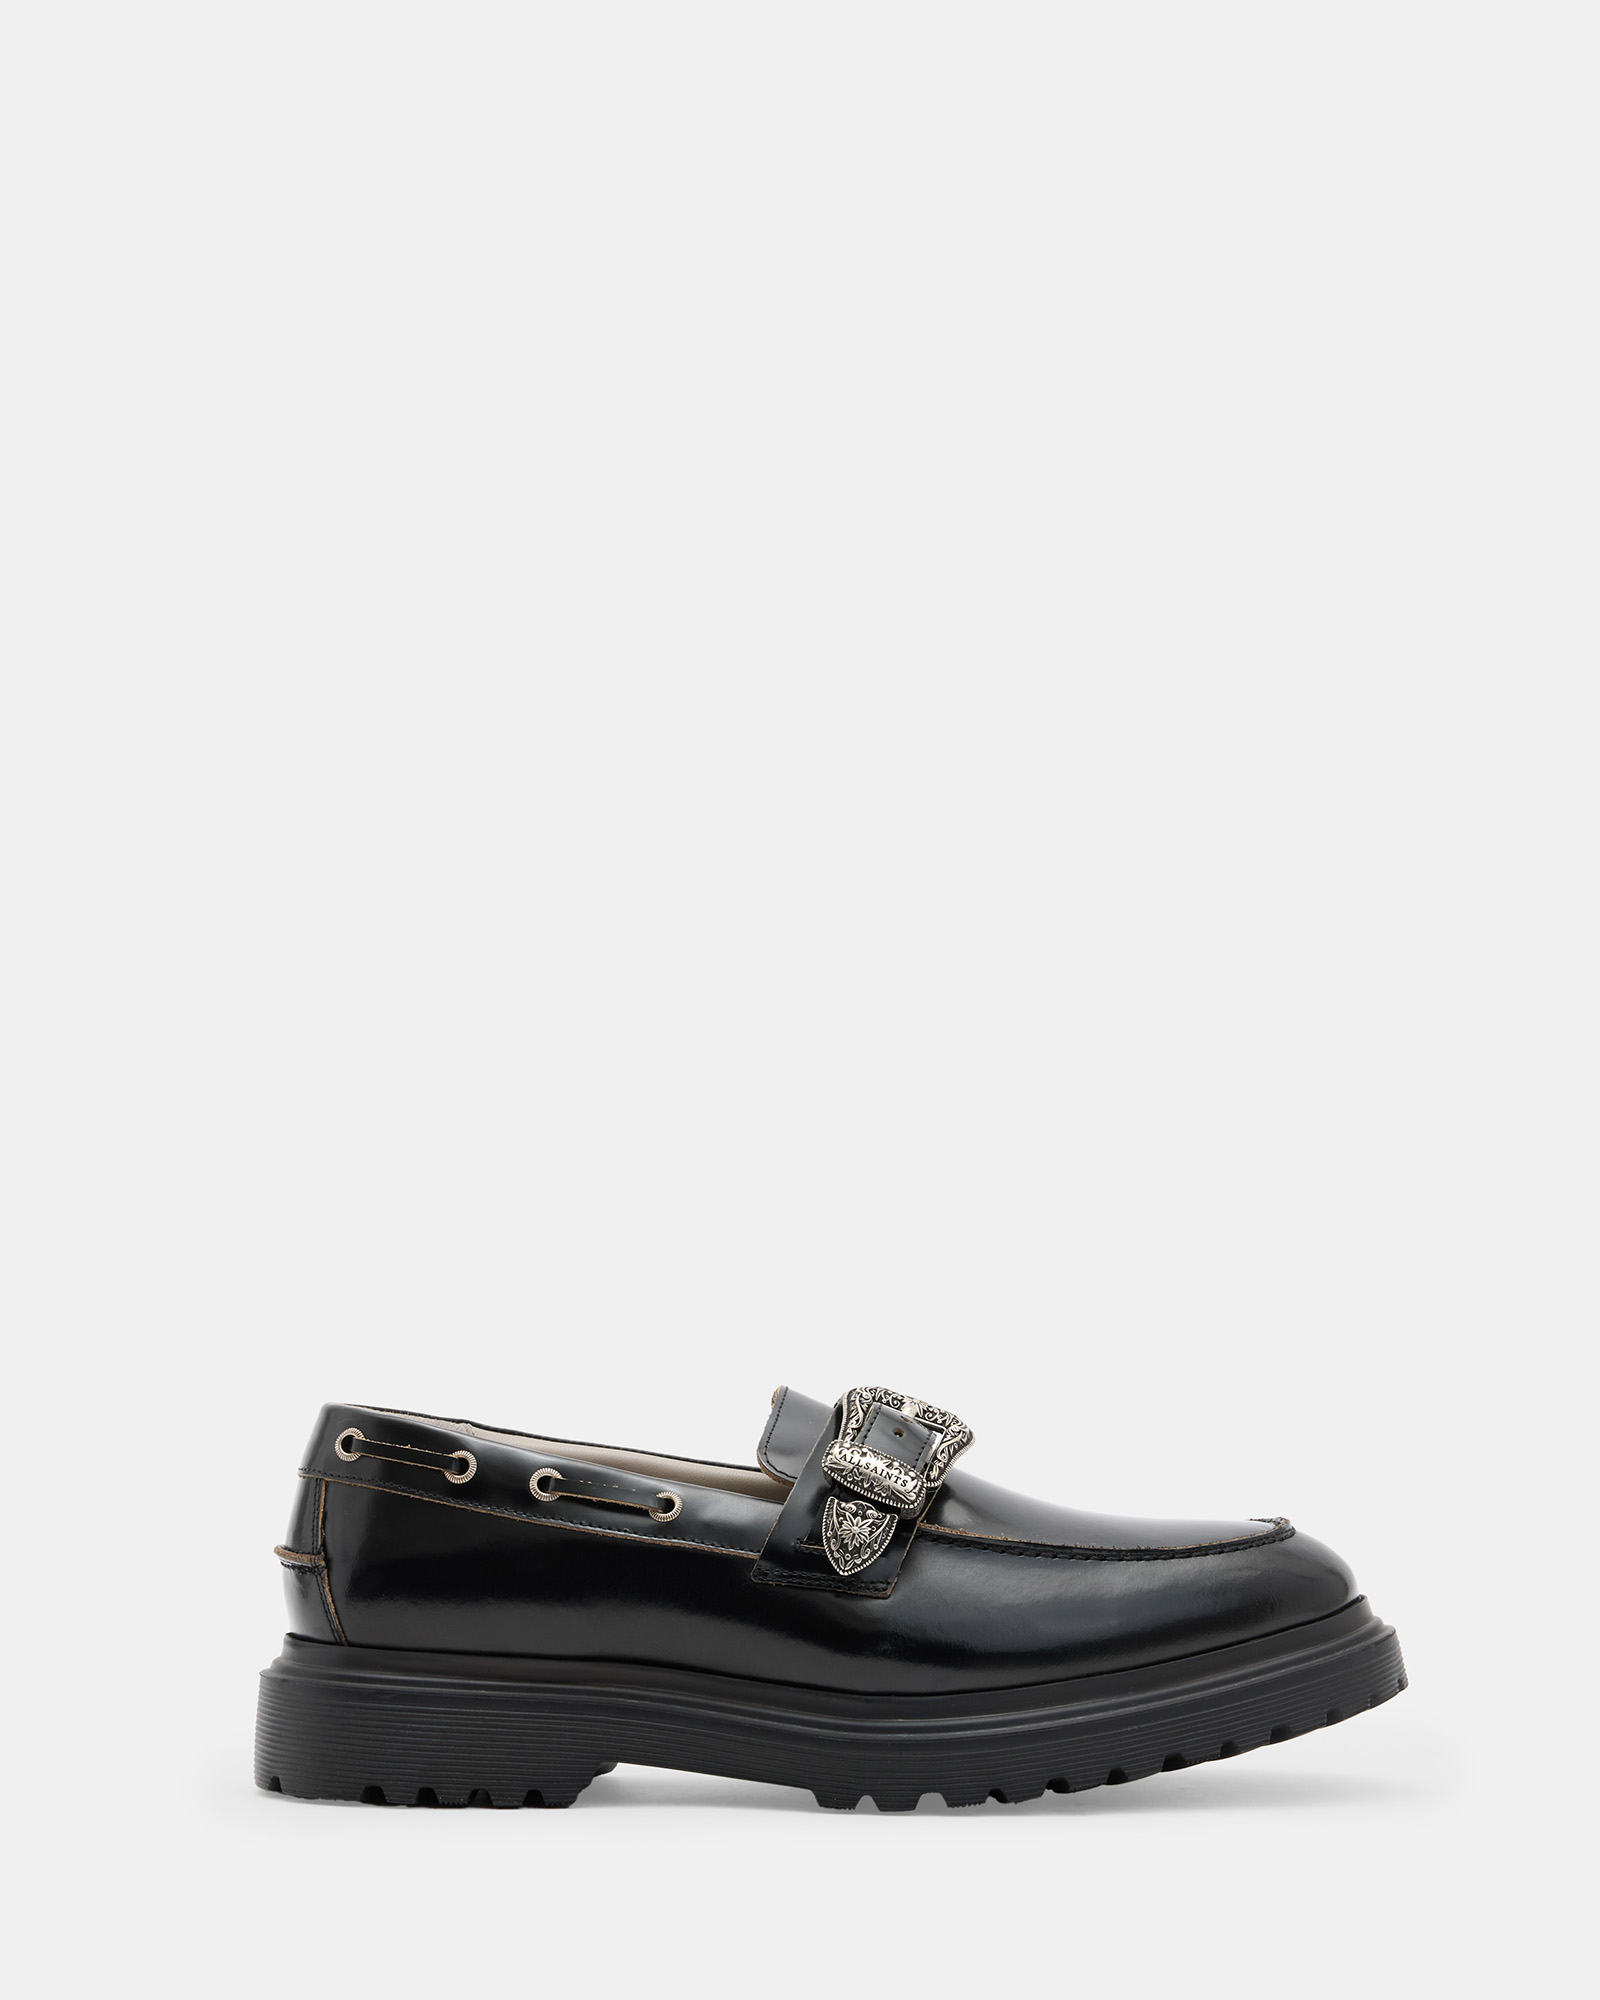 AllSaints Hanbury Leather Western Loafers